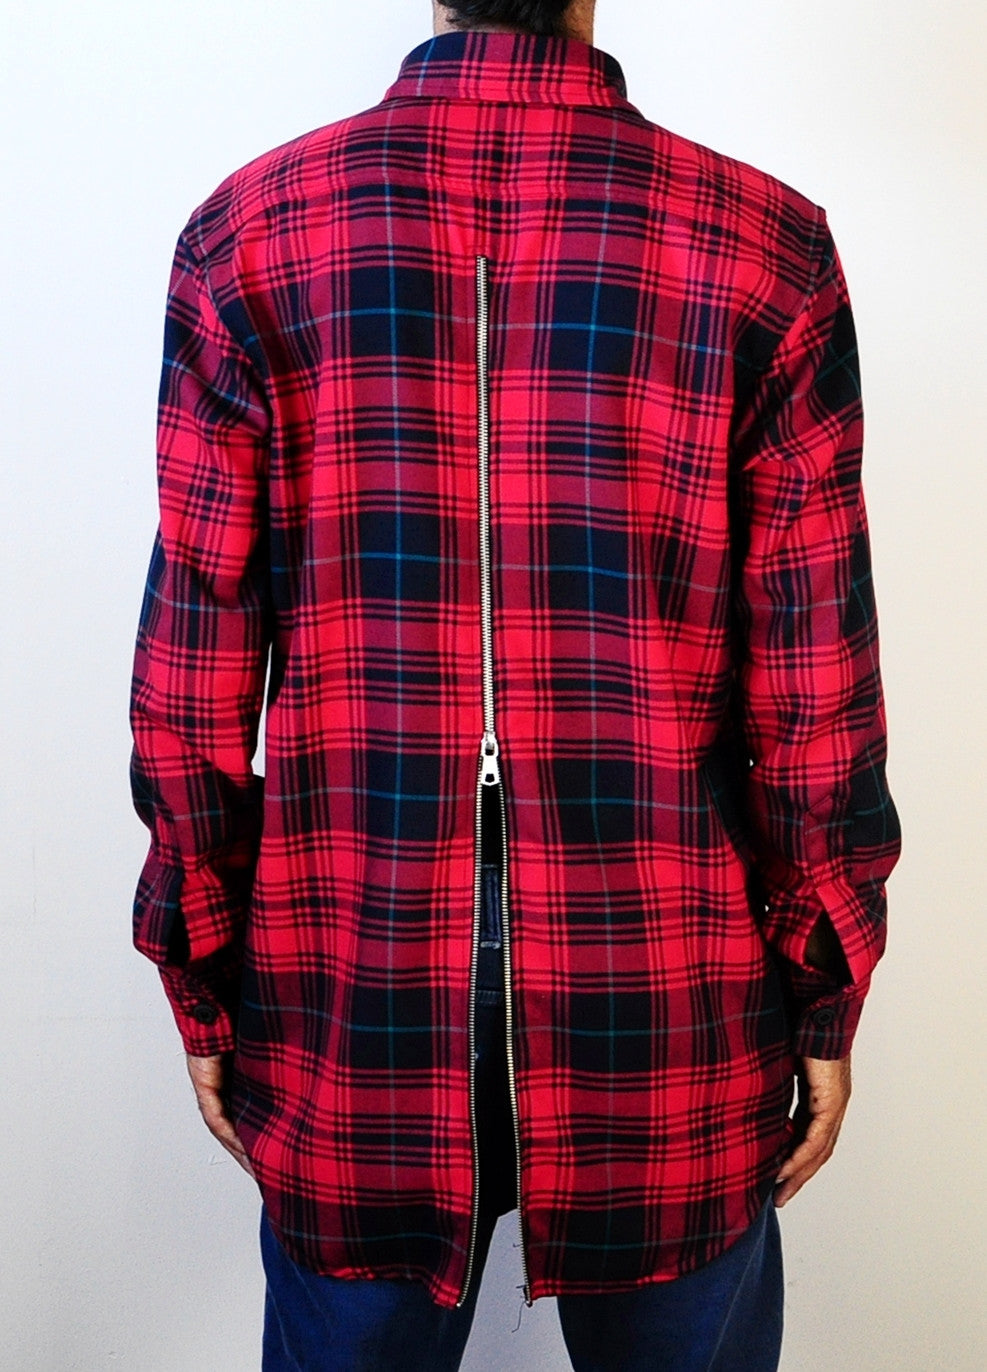 Rear Back-YKK Zip Slim Fit Long Sleeve Flannel Plaid Check Shirt Button Front Shirt - Red//Blue-